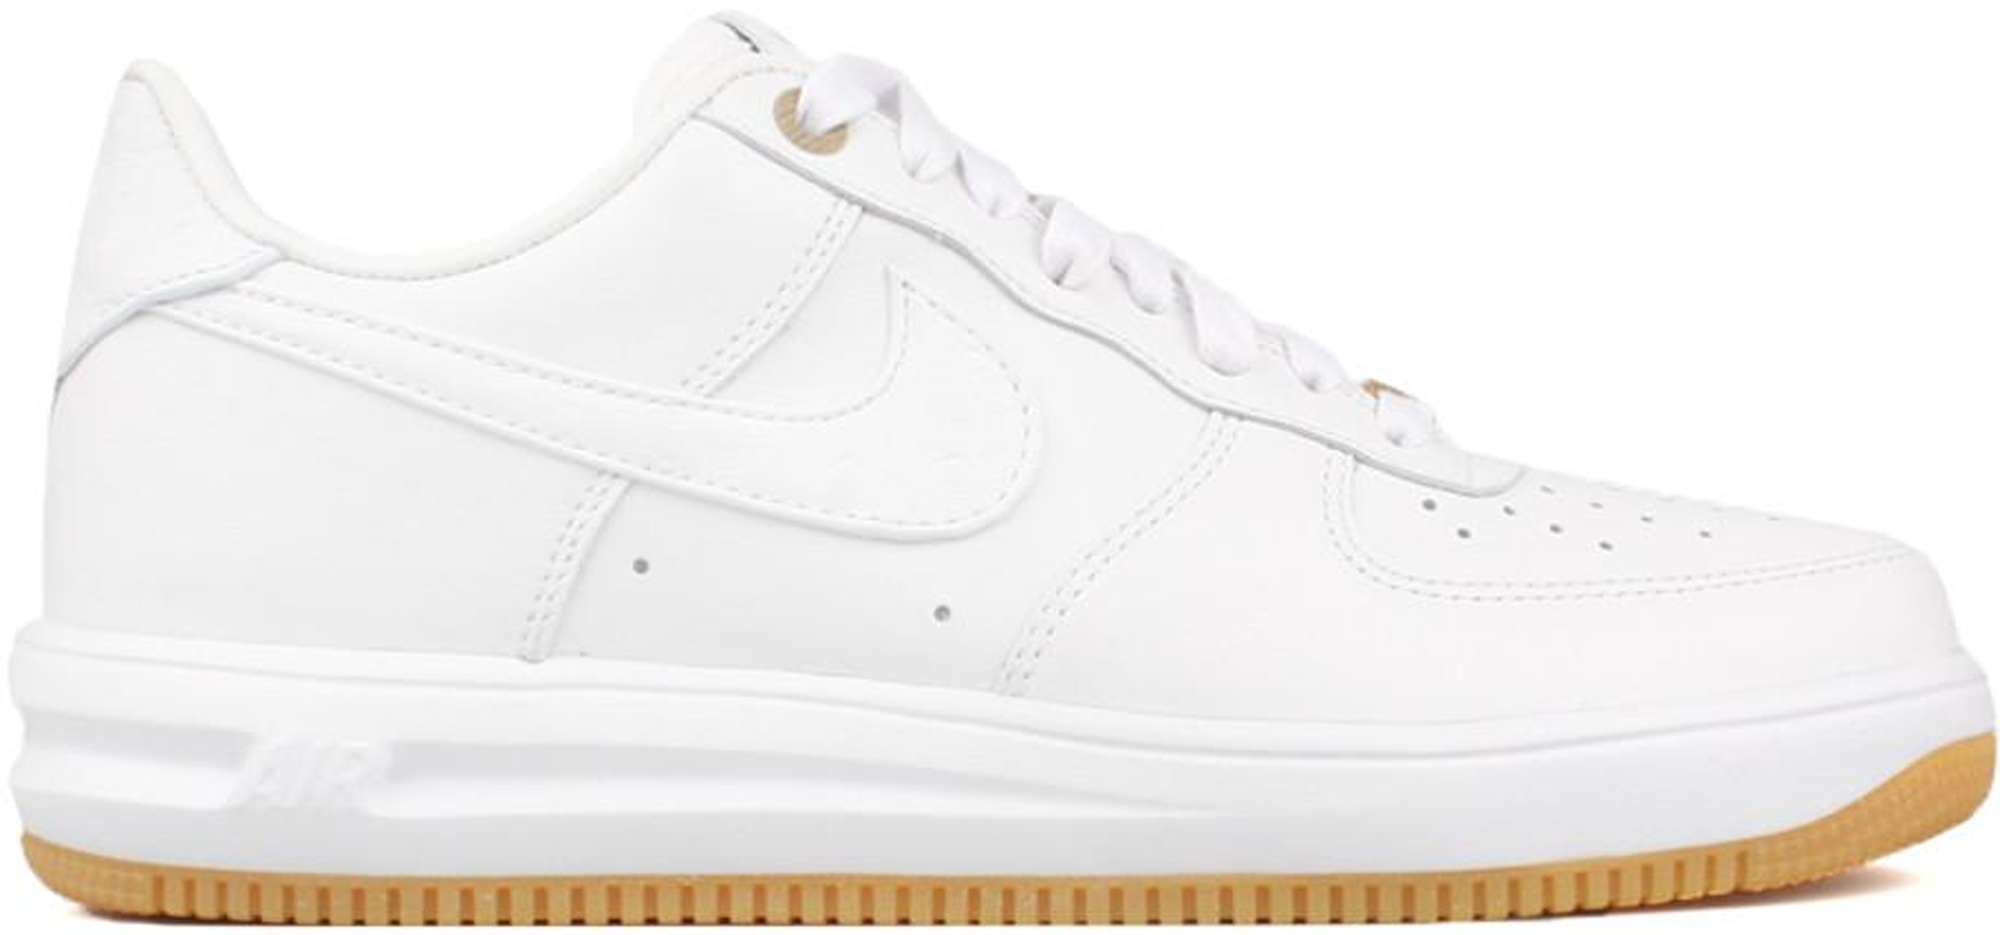 lunar force 1 low white